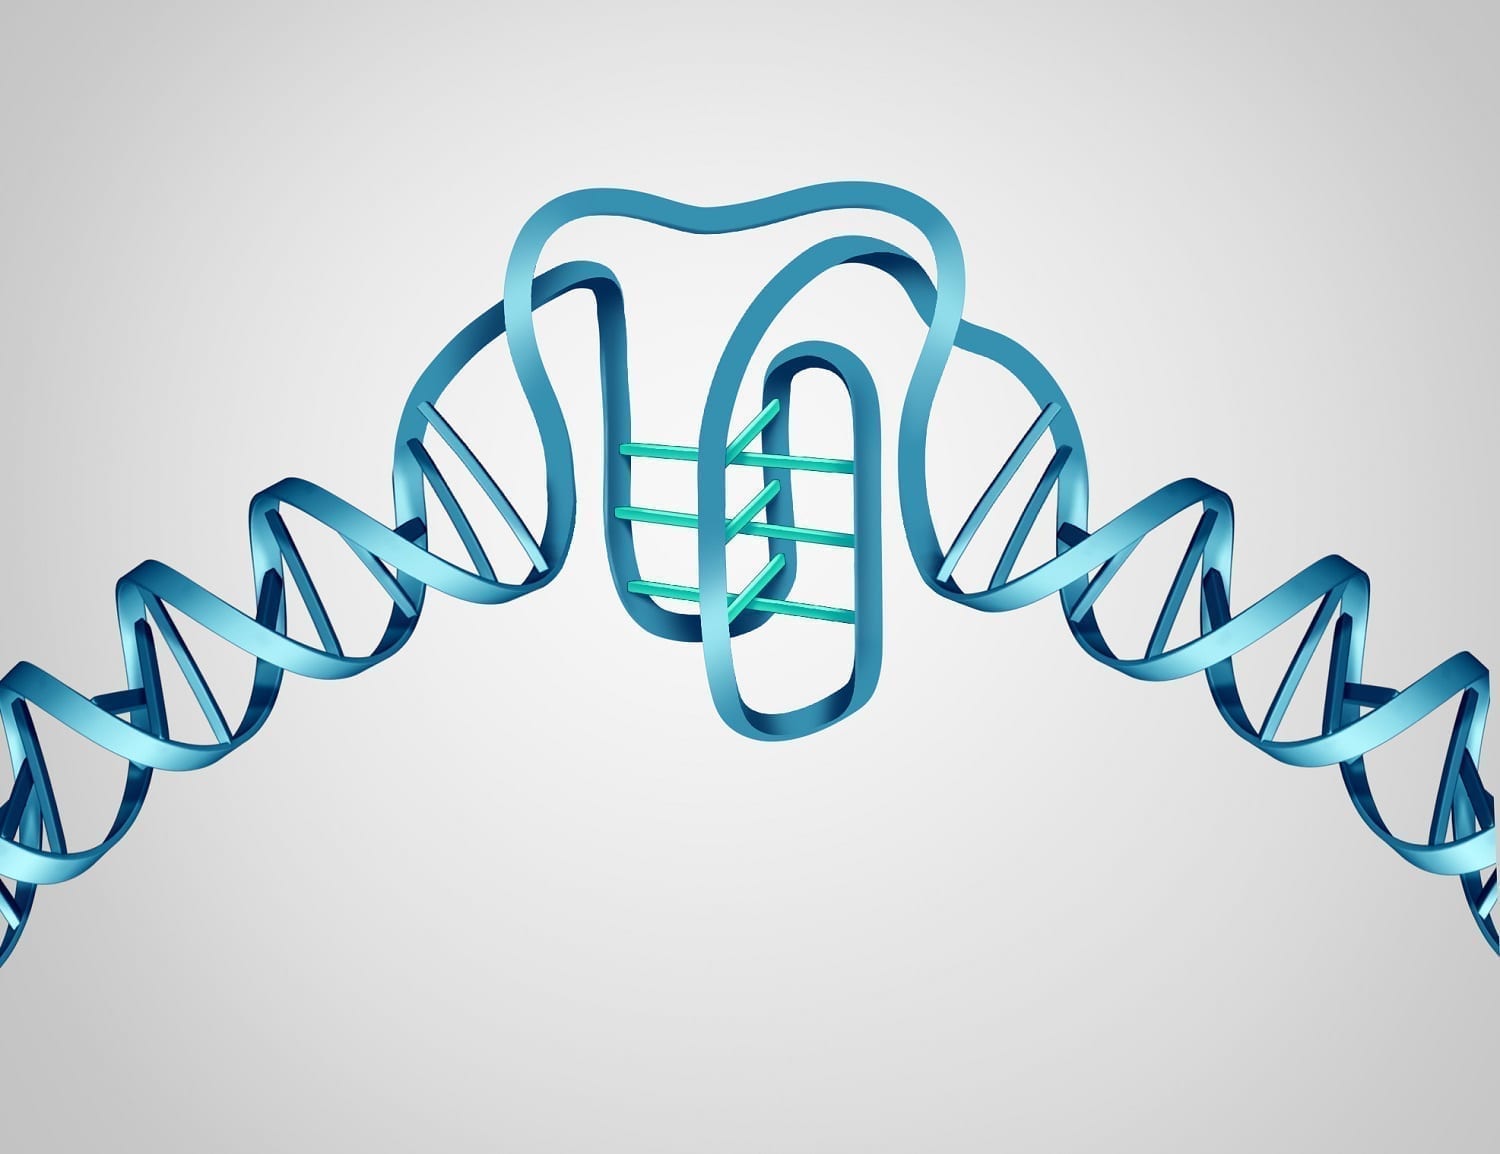 DNA structure showing "I-motif" addition graphic: ID 115590529 © Skypixel | Dreamstime.com